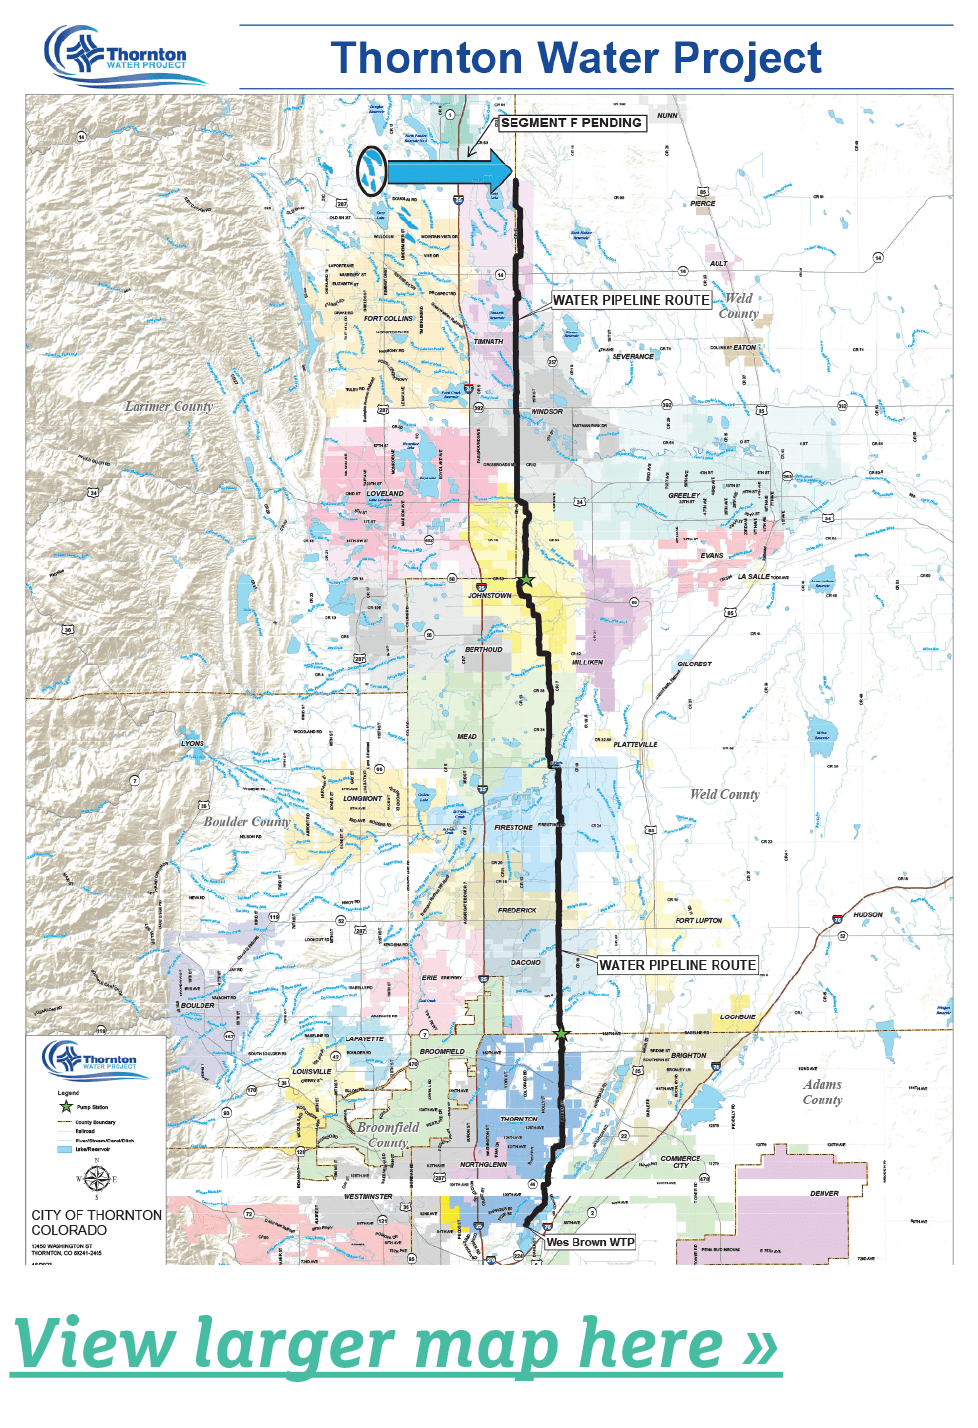 Thornton Water Project Pipeline Map image